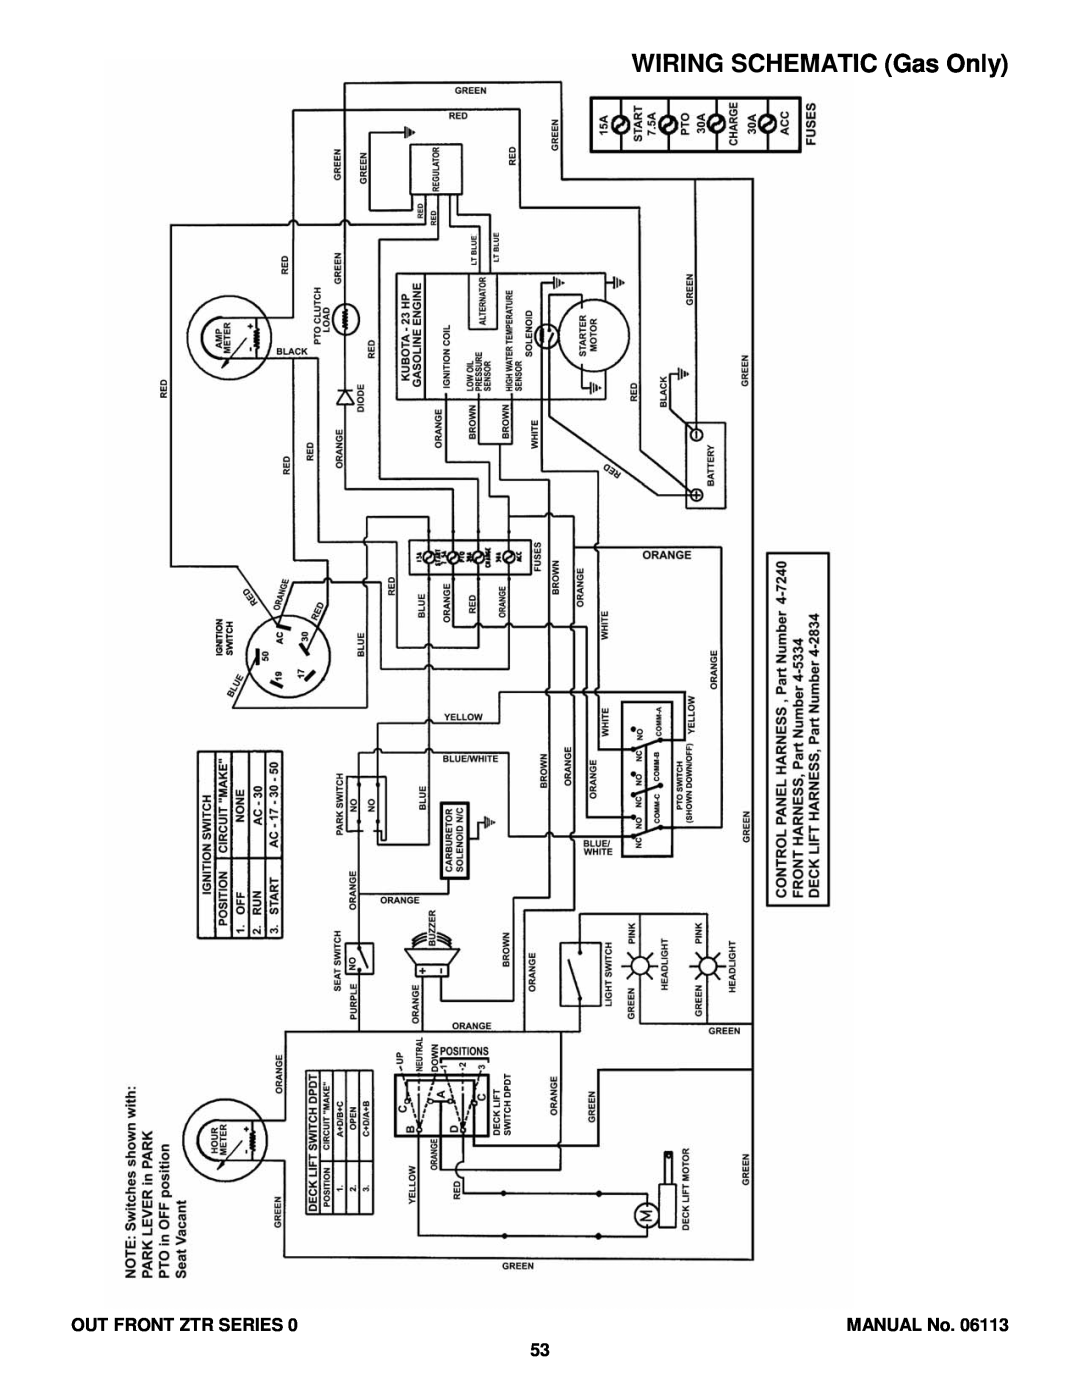 Snapper EZF6100M, EZF5200M, EZF2100DKU, ZF2300GKU manual WIRING SCHEMATIC Gas Only, Out Front Ztr Series 